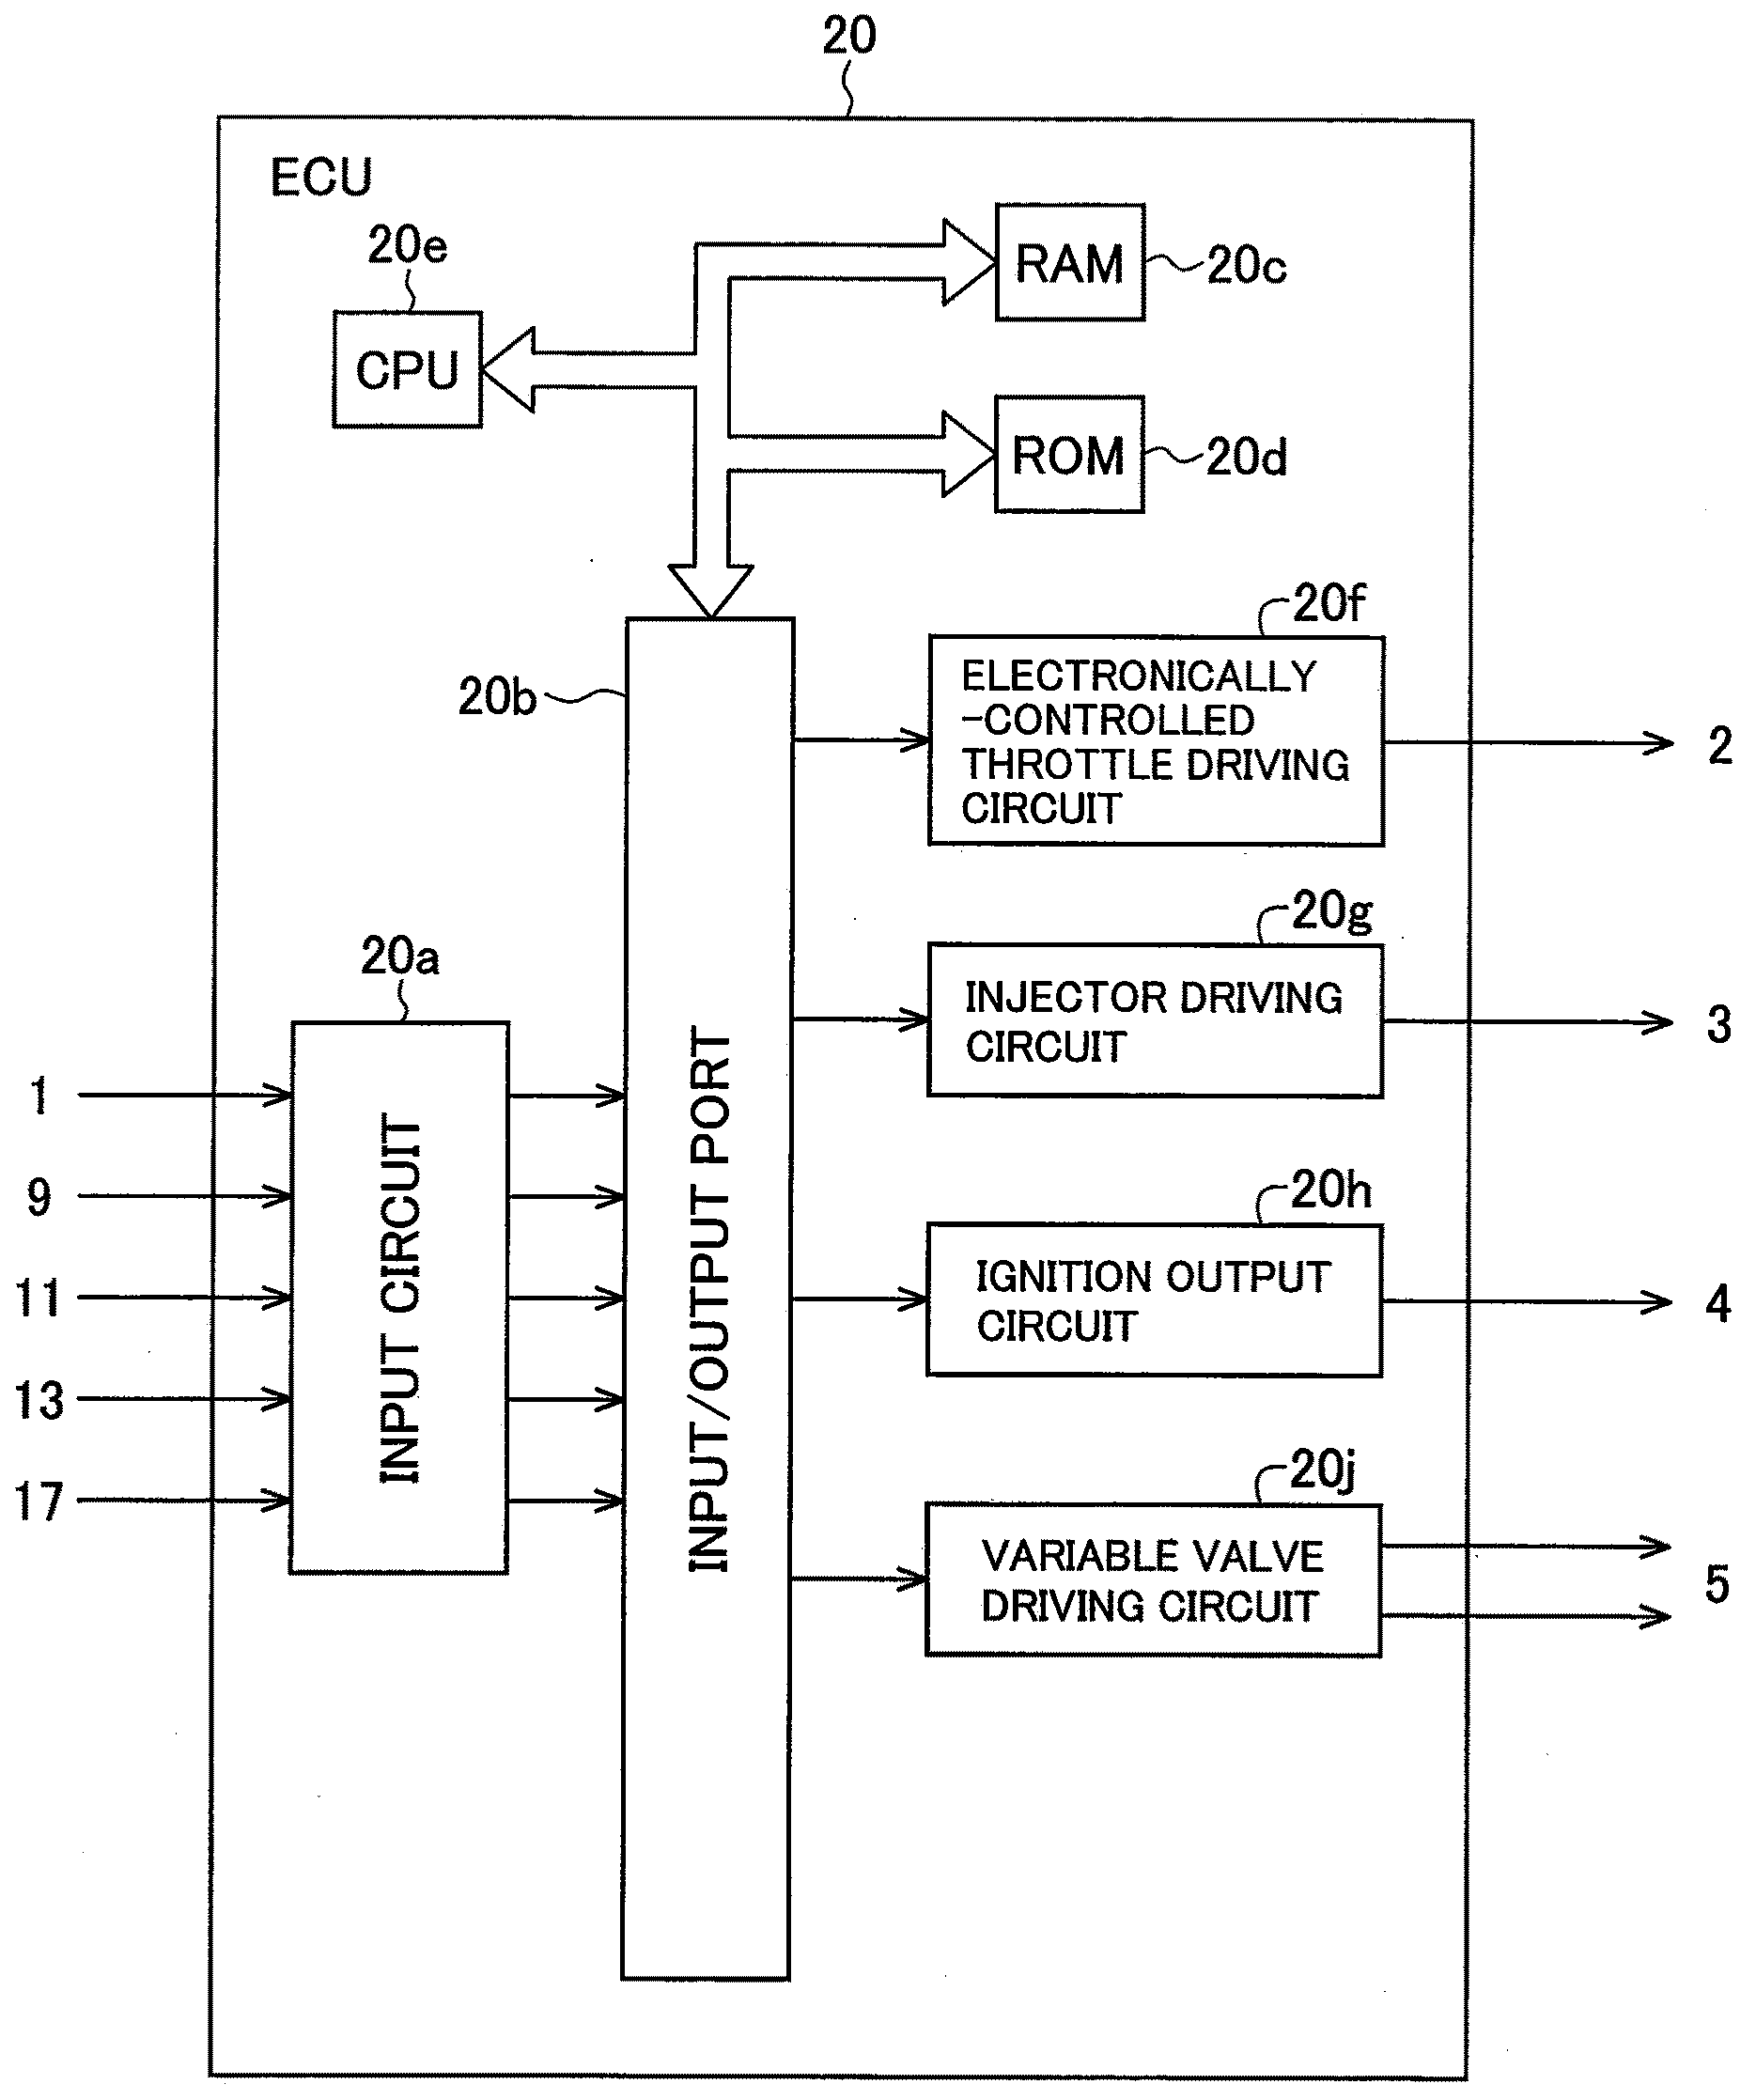 Control Apparatus for Spark-Ignition Engine